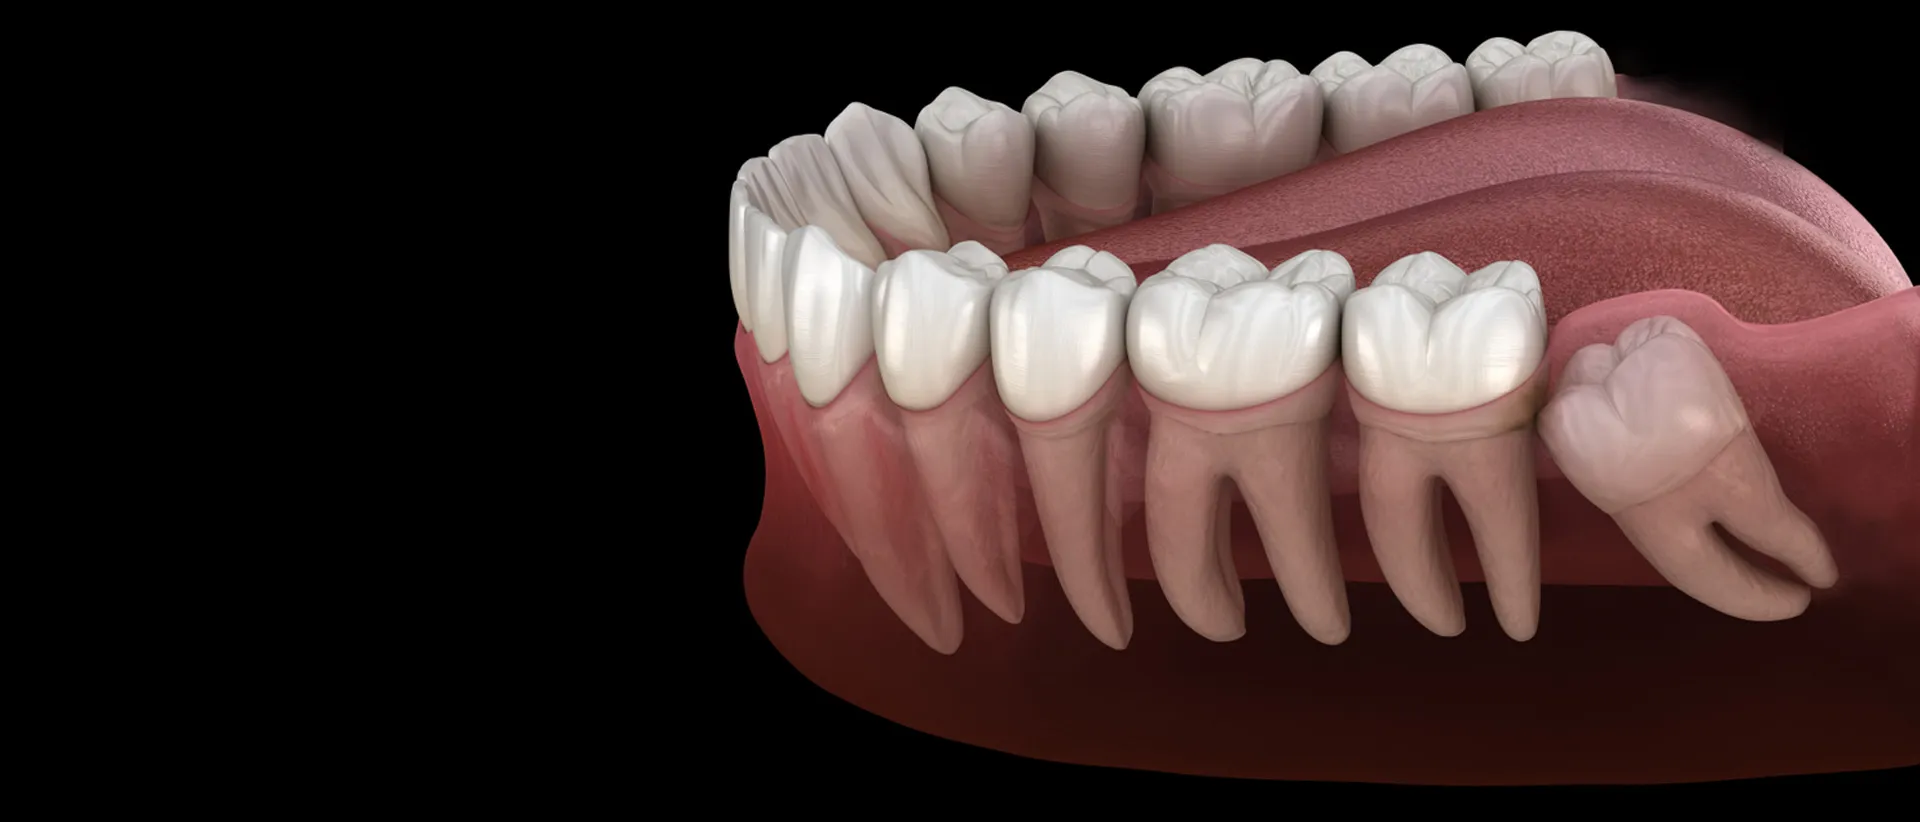 An illustration of white teeth indicates a horizontal impacted wisdom tooth.
